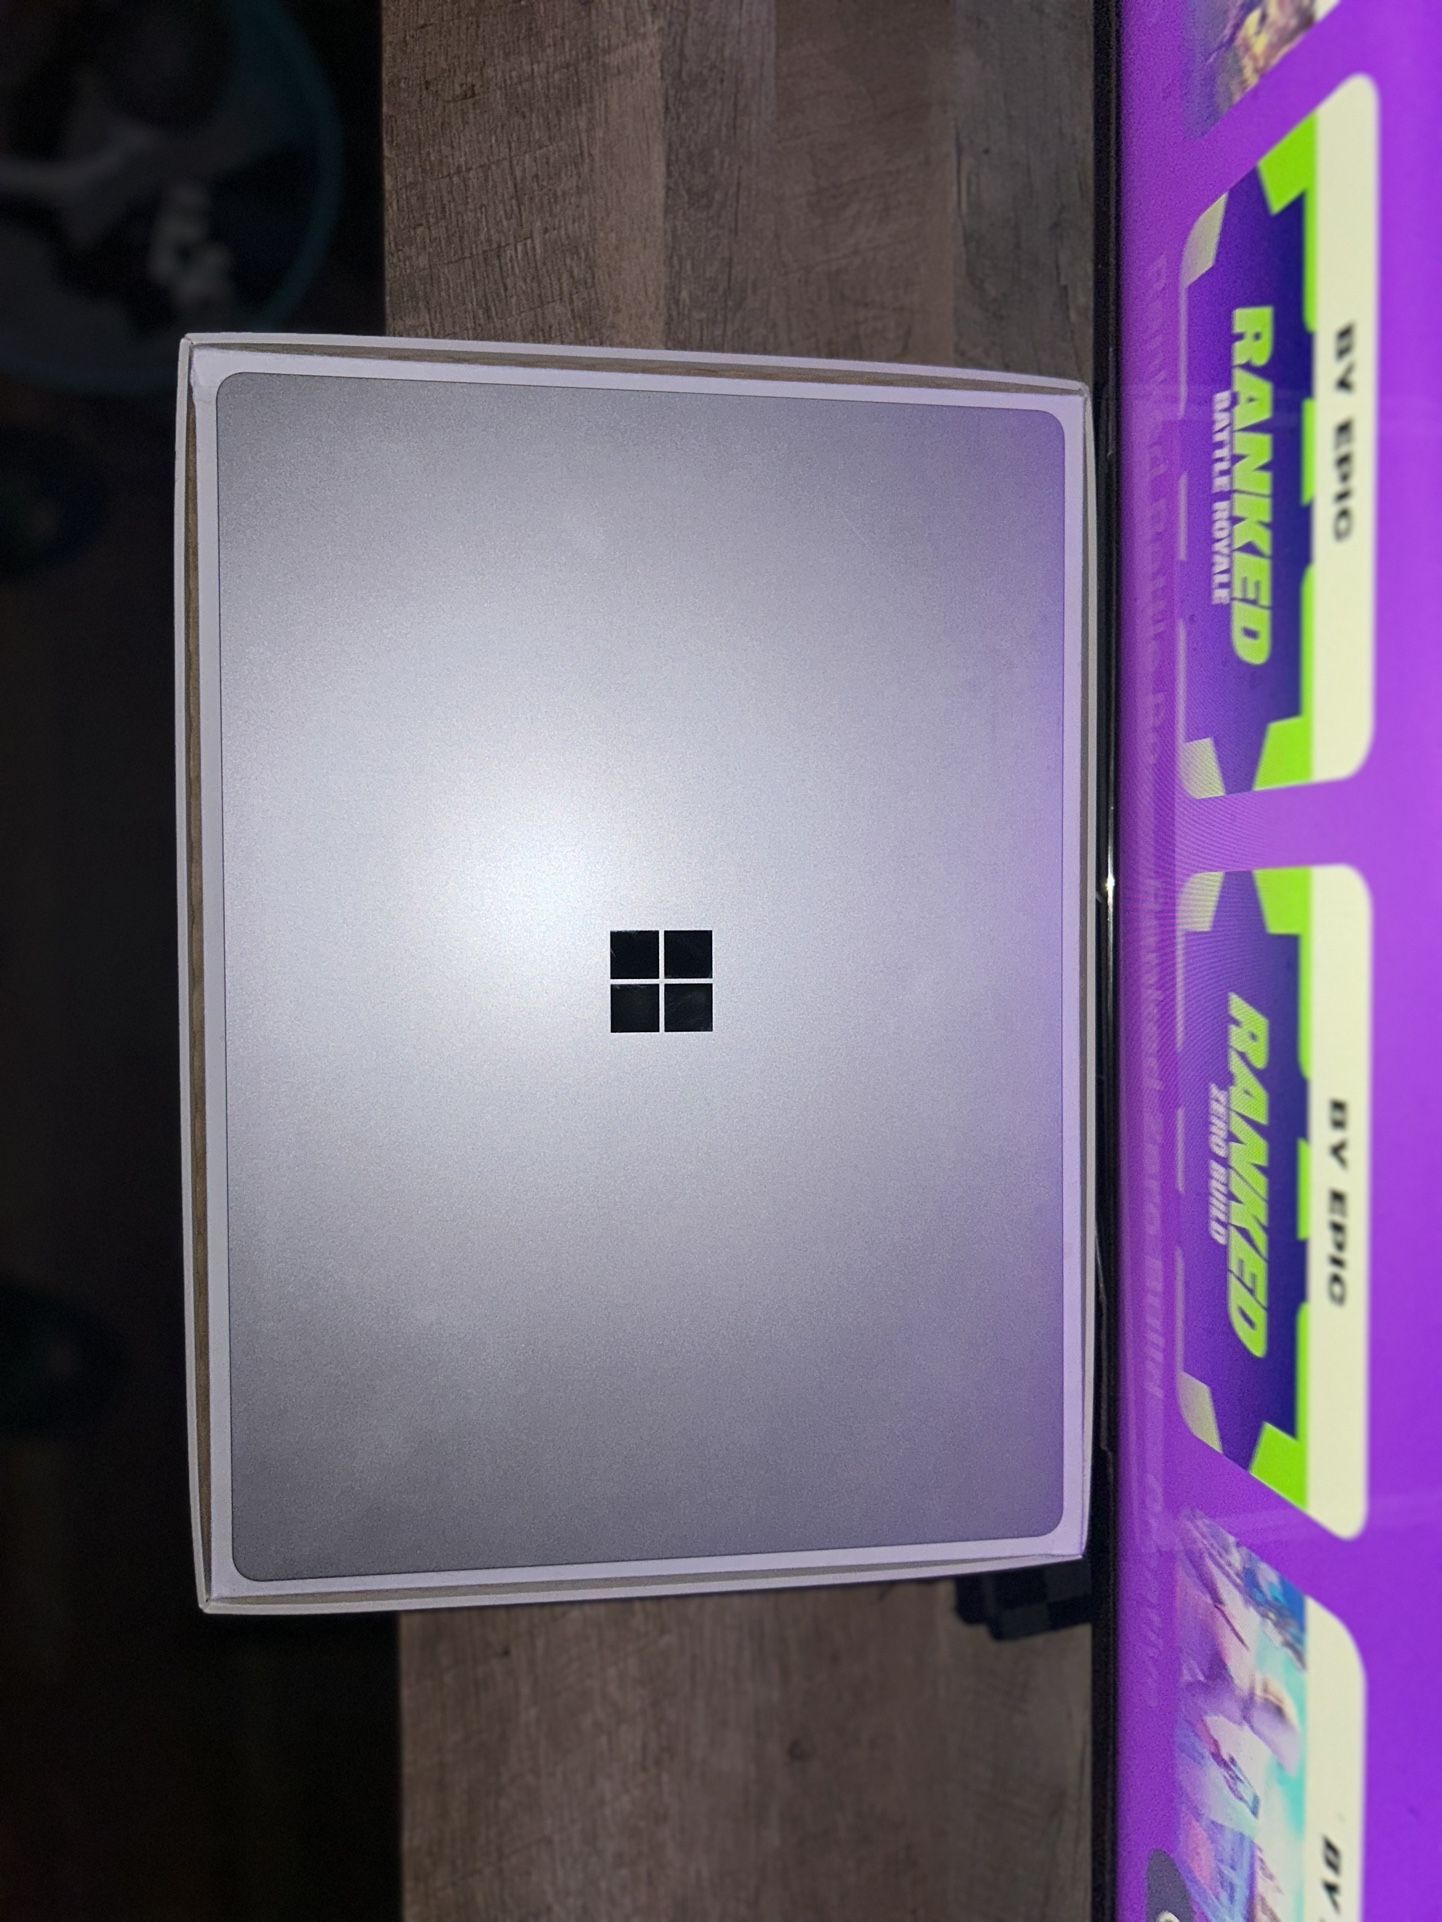 Microsoft - Surface Laptop 4 - 15” Touch-Screen - AMD Ryzen 7 Surface Edition with 8GB Memory - 512G